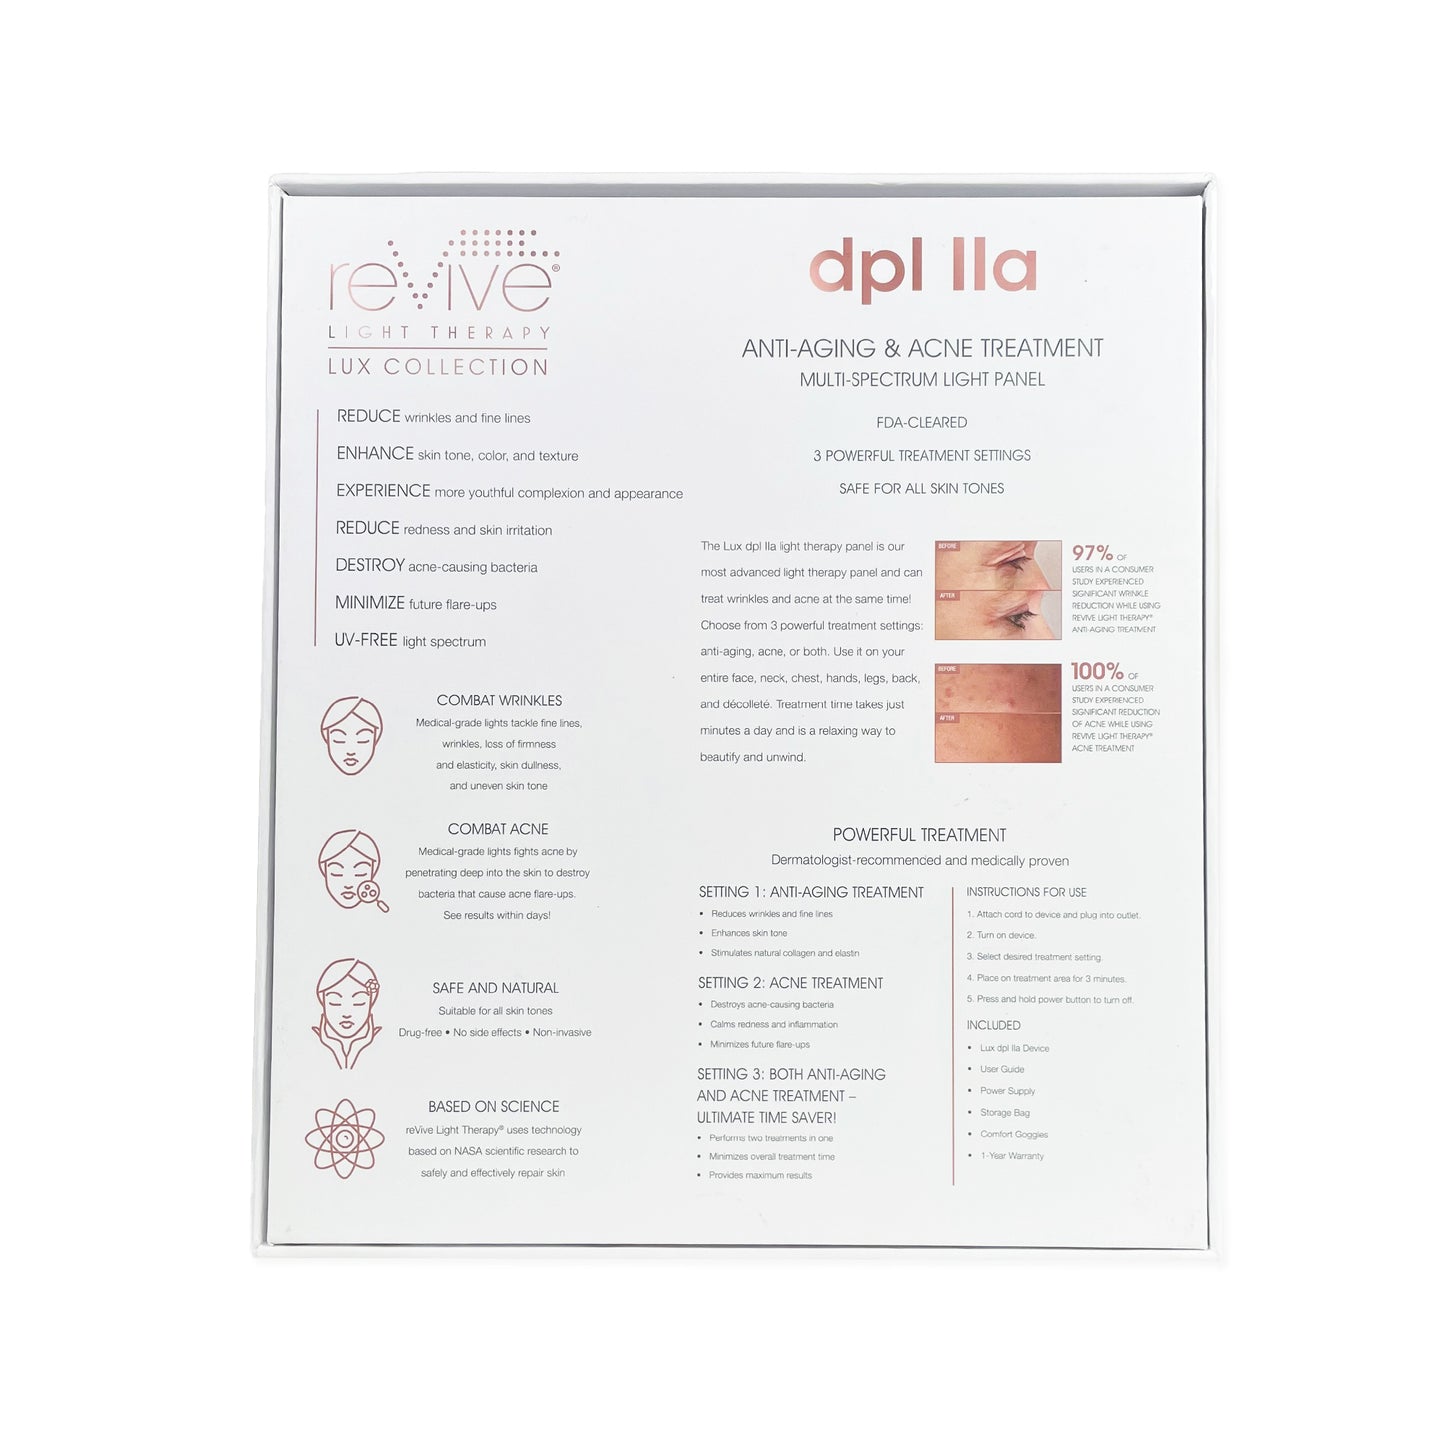 Lux dpl lla LED Wrinkle Reduction & Acne Treatment Panel by reVive Light Therapy